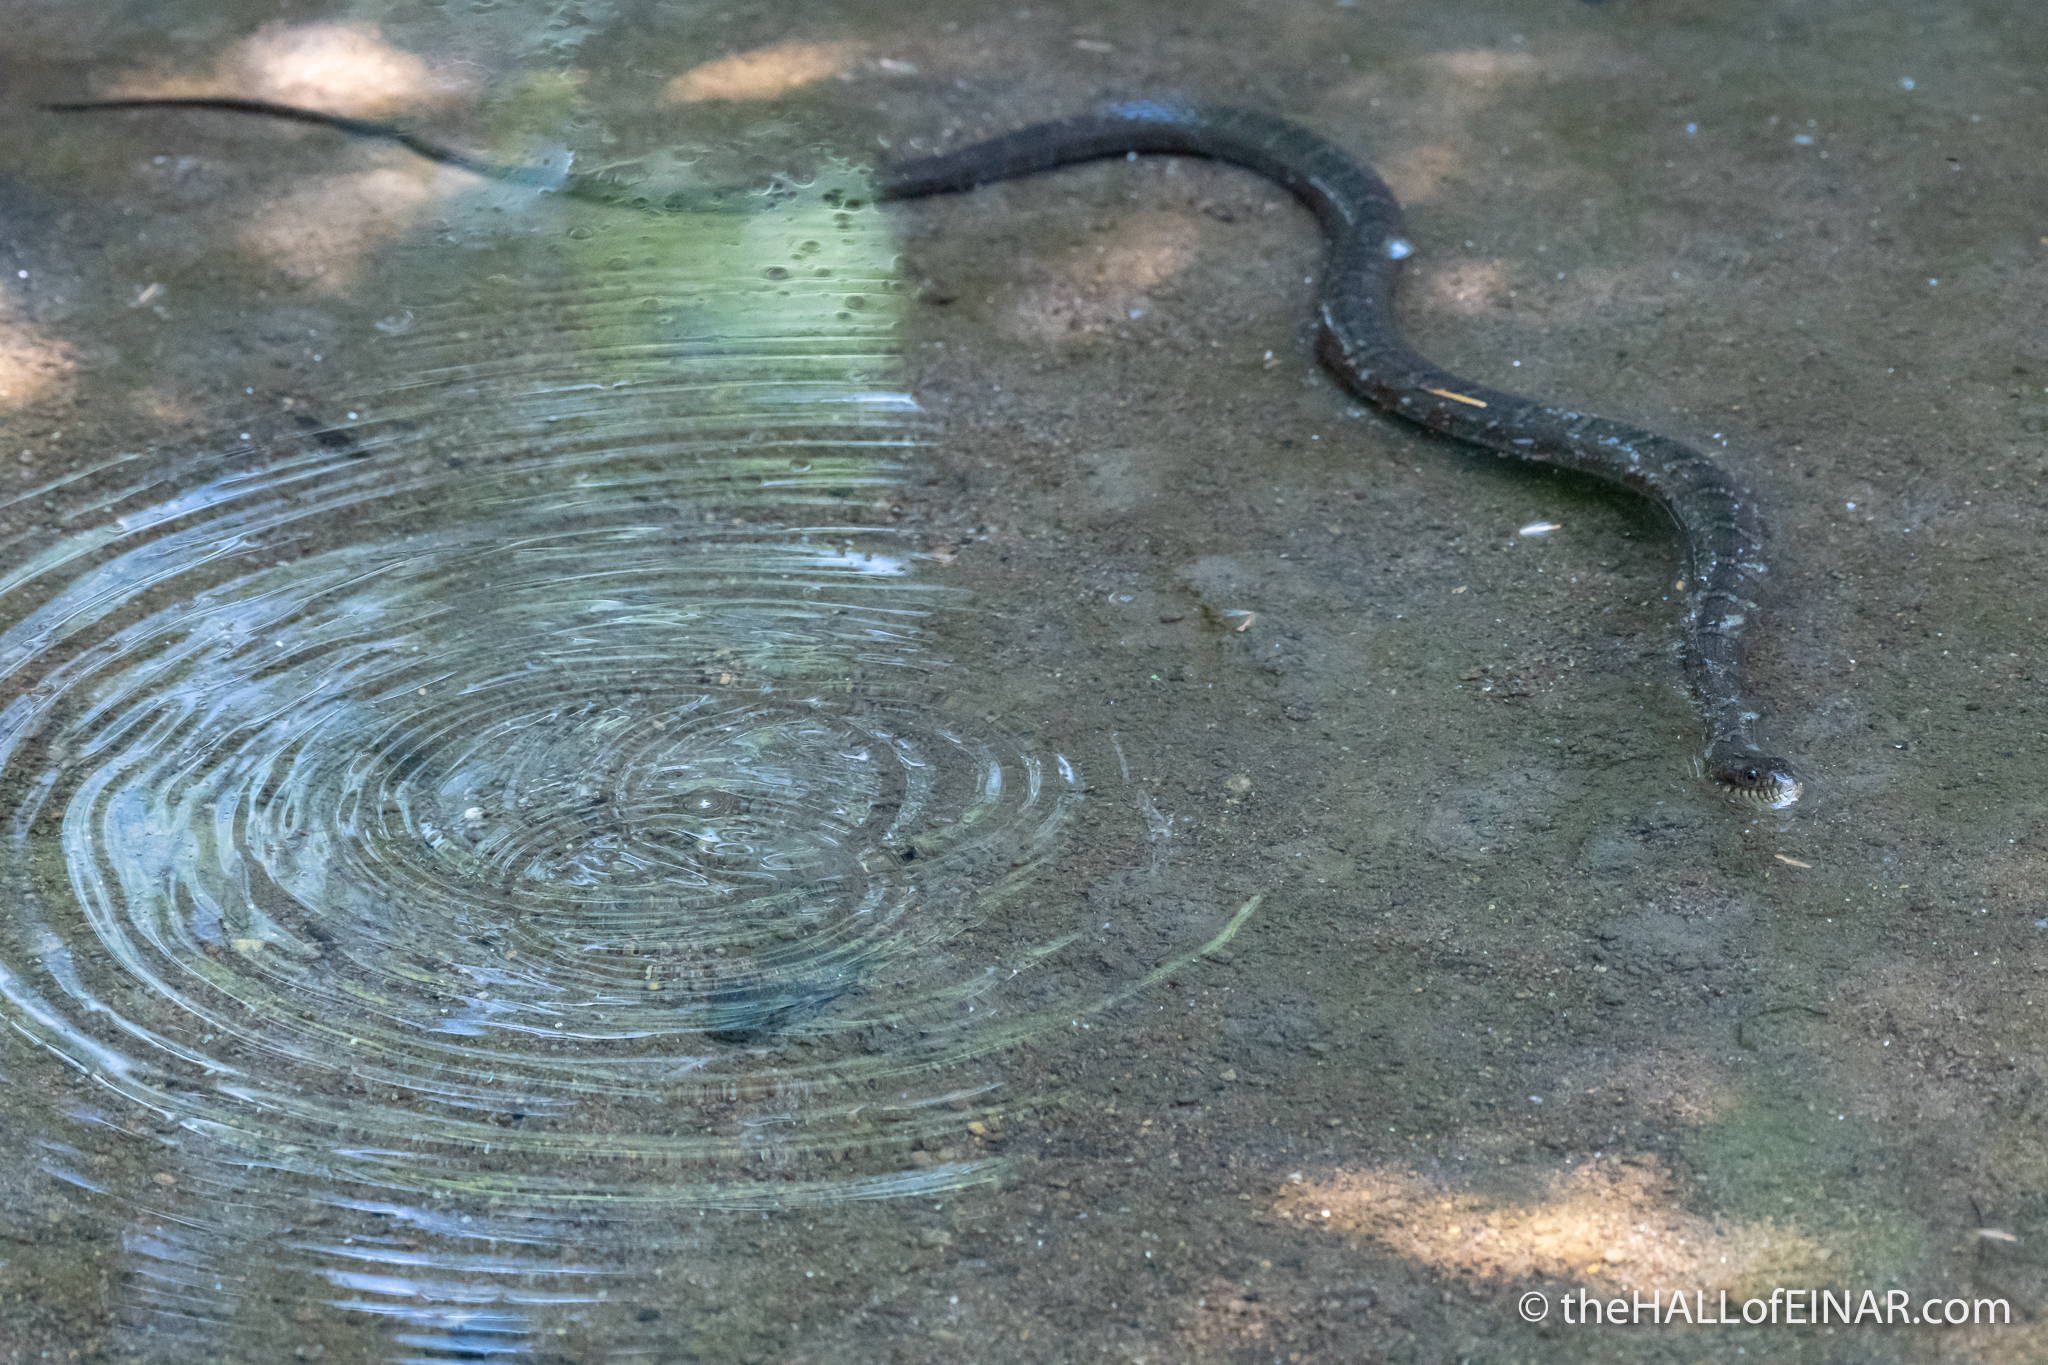 Northern Watersnake - The Hall of Einar - photograph (c) David Bailey (not the)